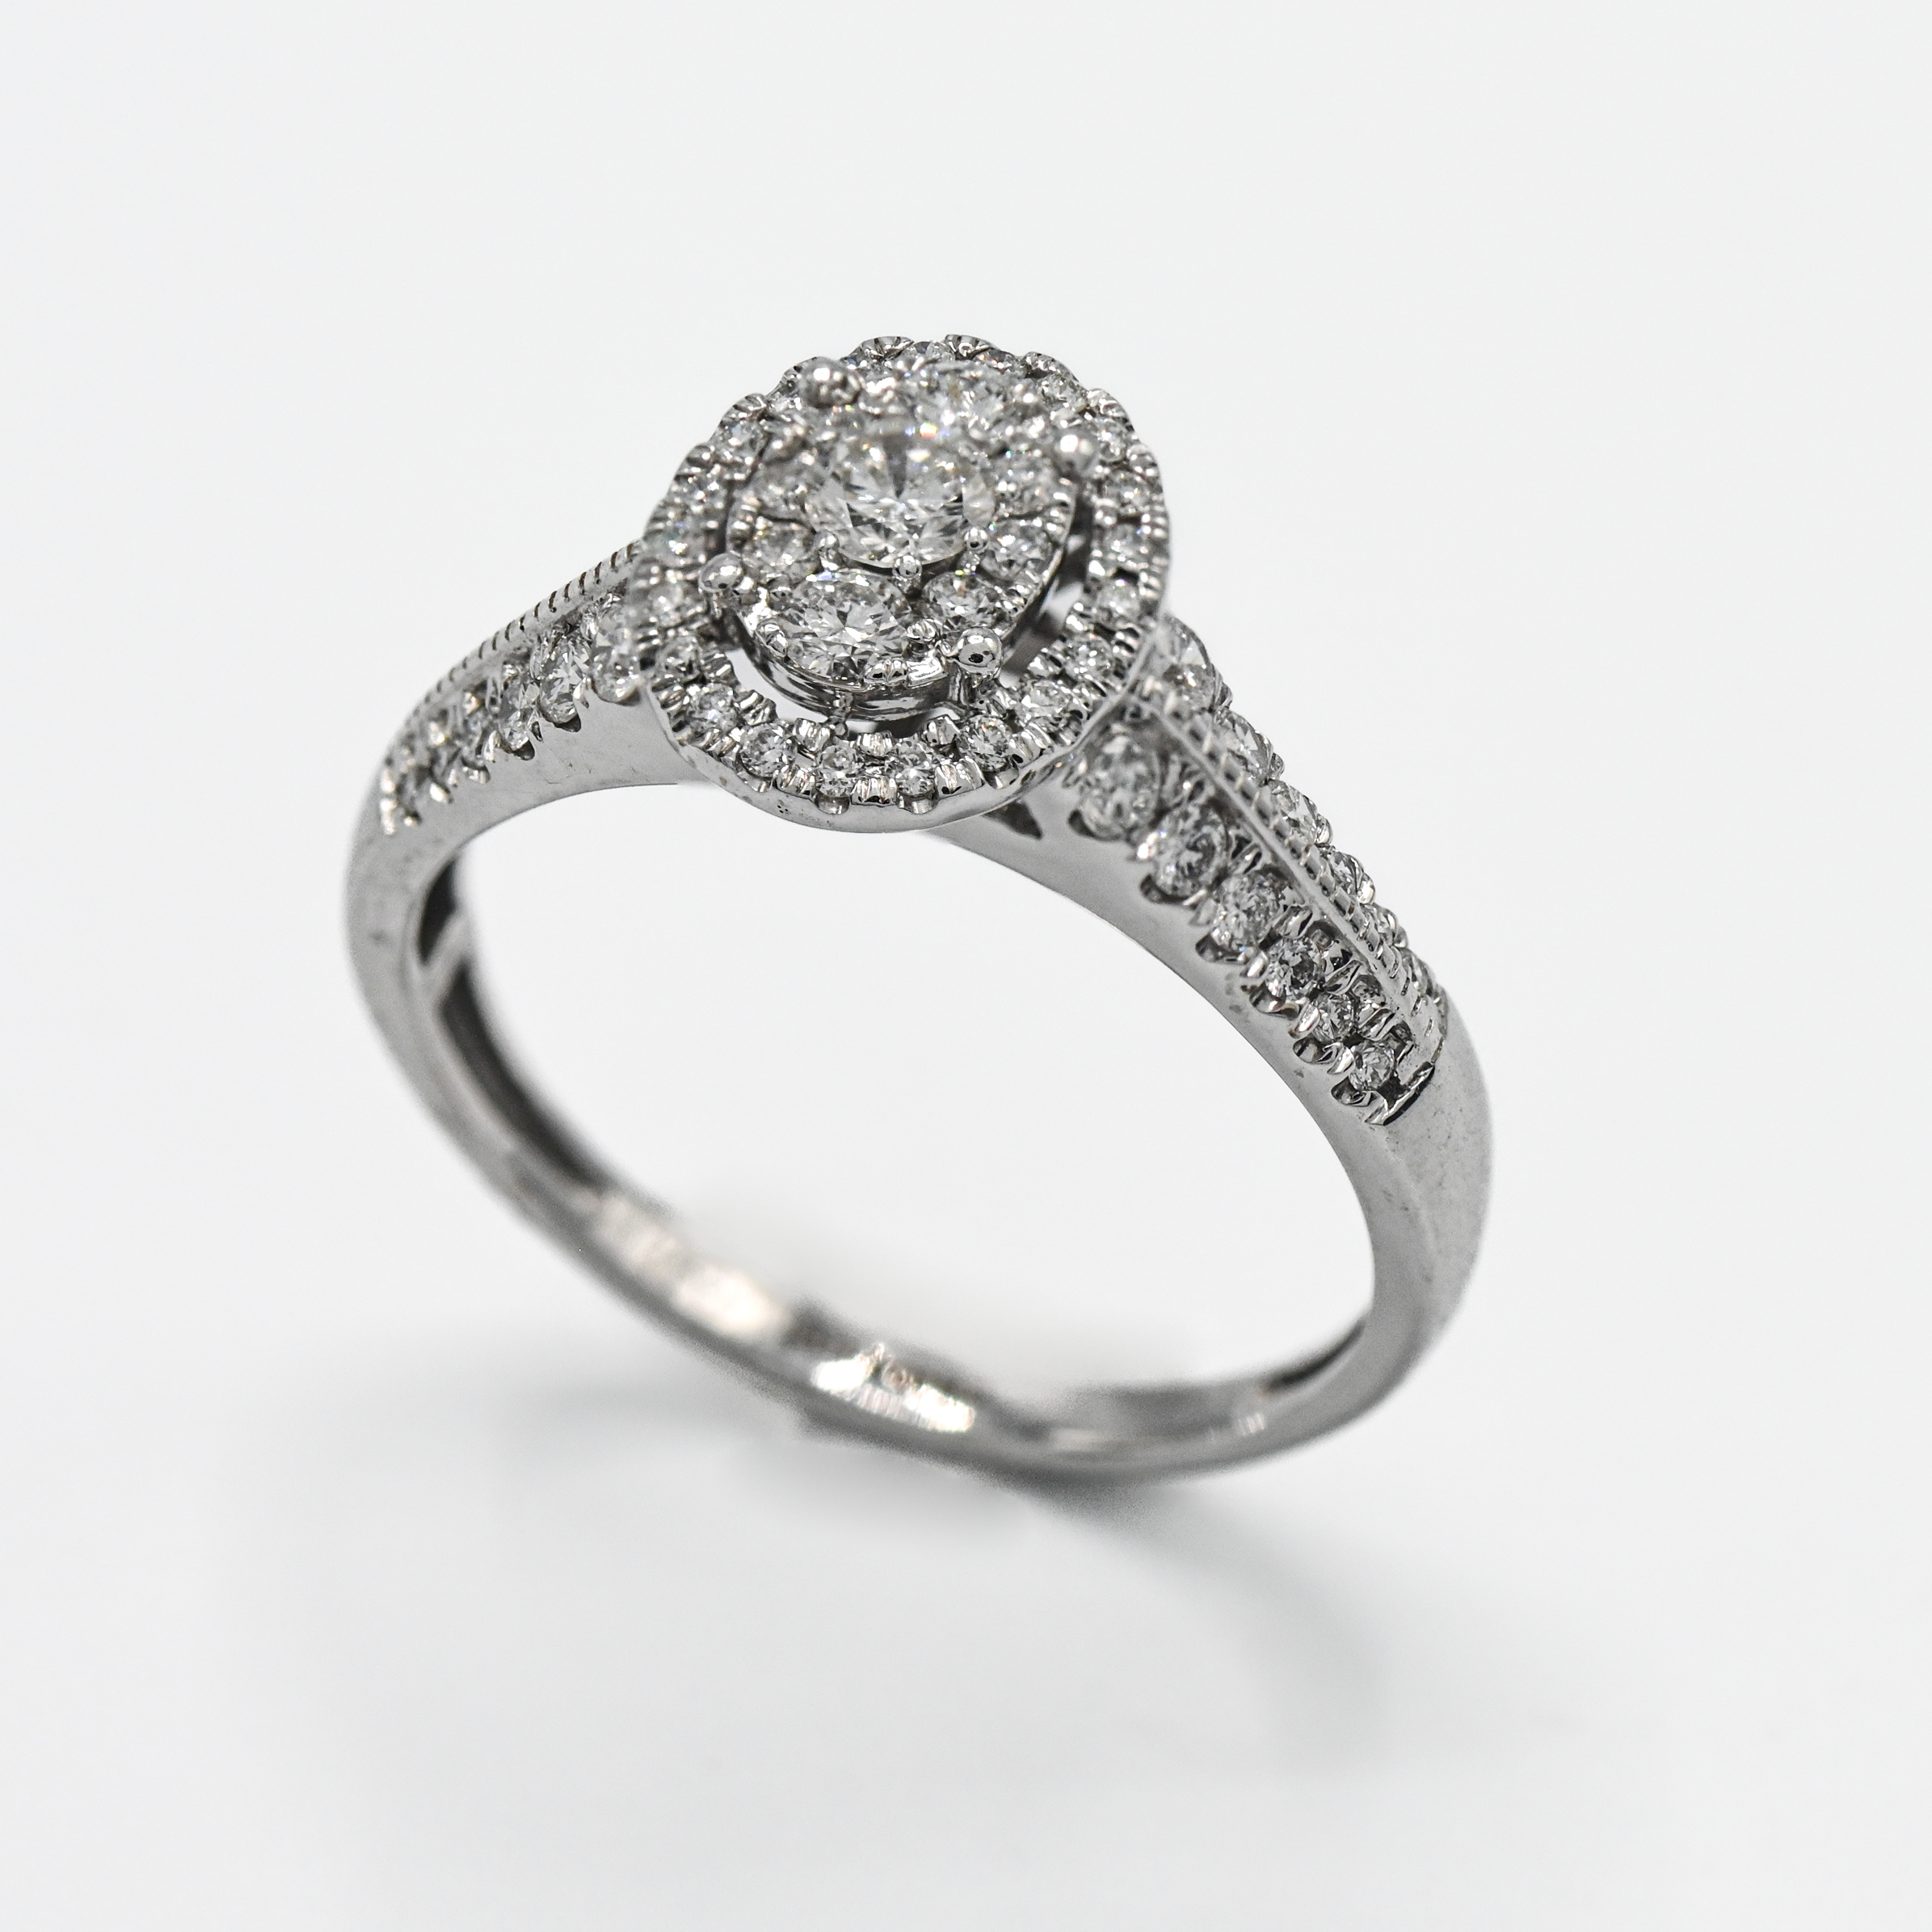 An 18ct white gold oval Pave set diamond cluster ring, set with diamonds on the shoulders, size R.